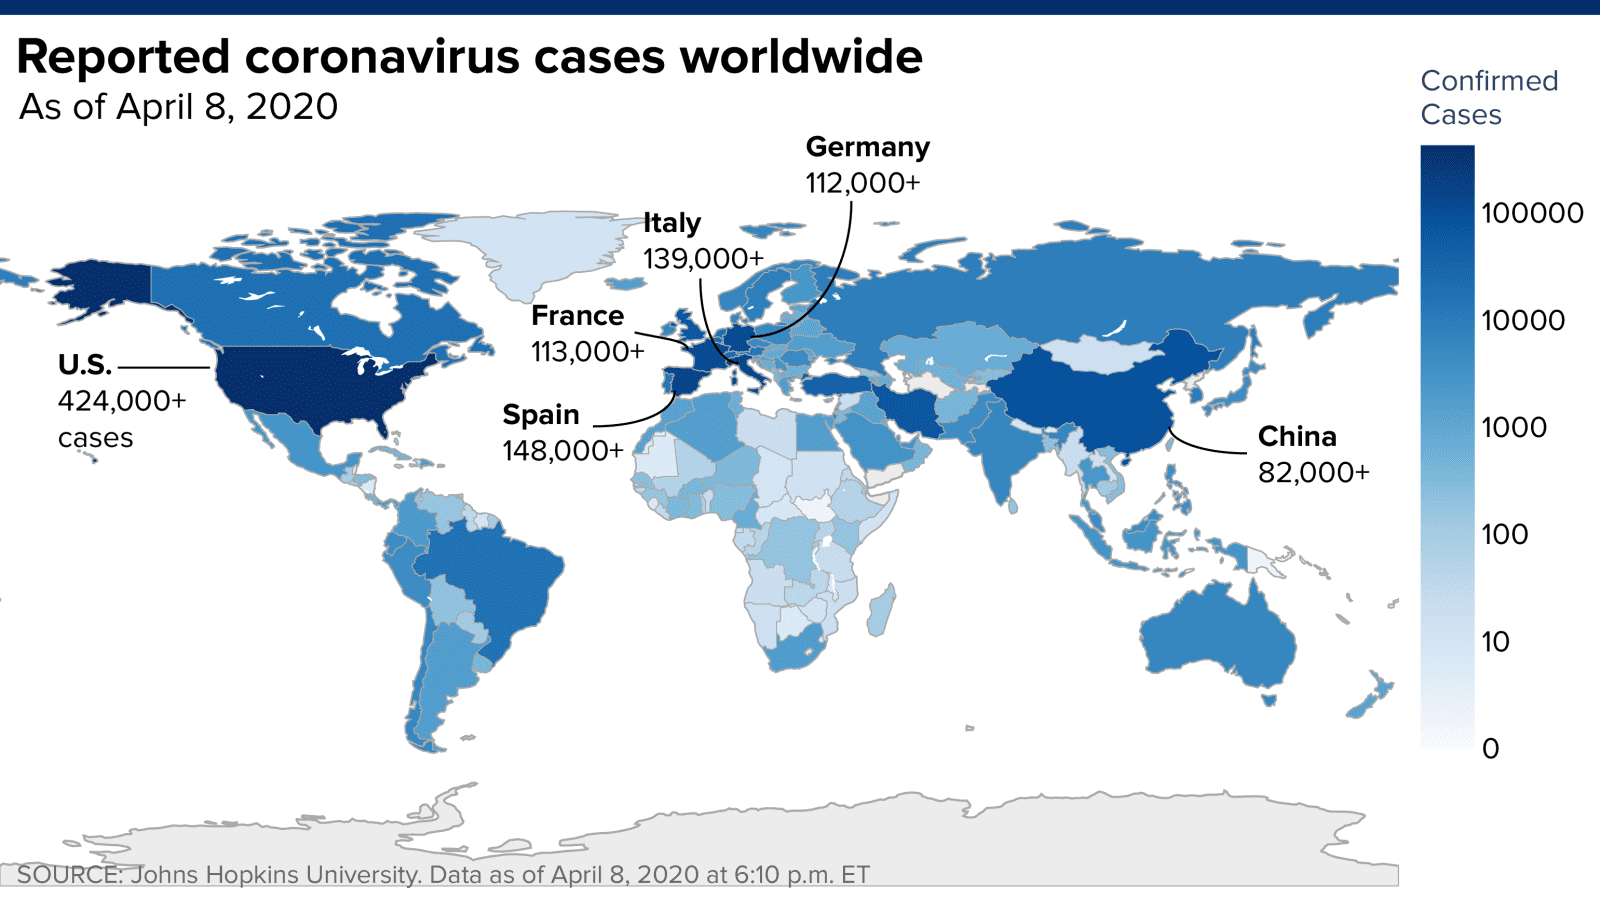 Coronavirus Live Updates Global Cases Cross 1 5 Million - roblox ups security efforts with online safety veteran hire